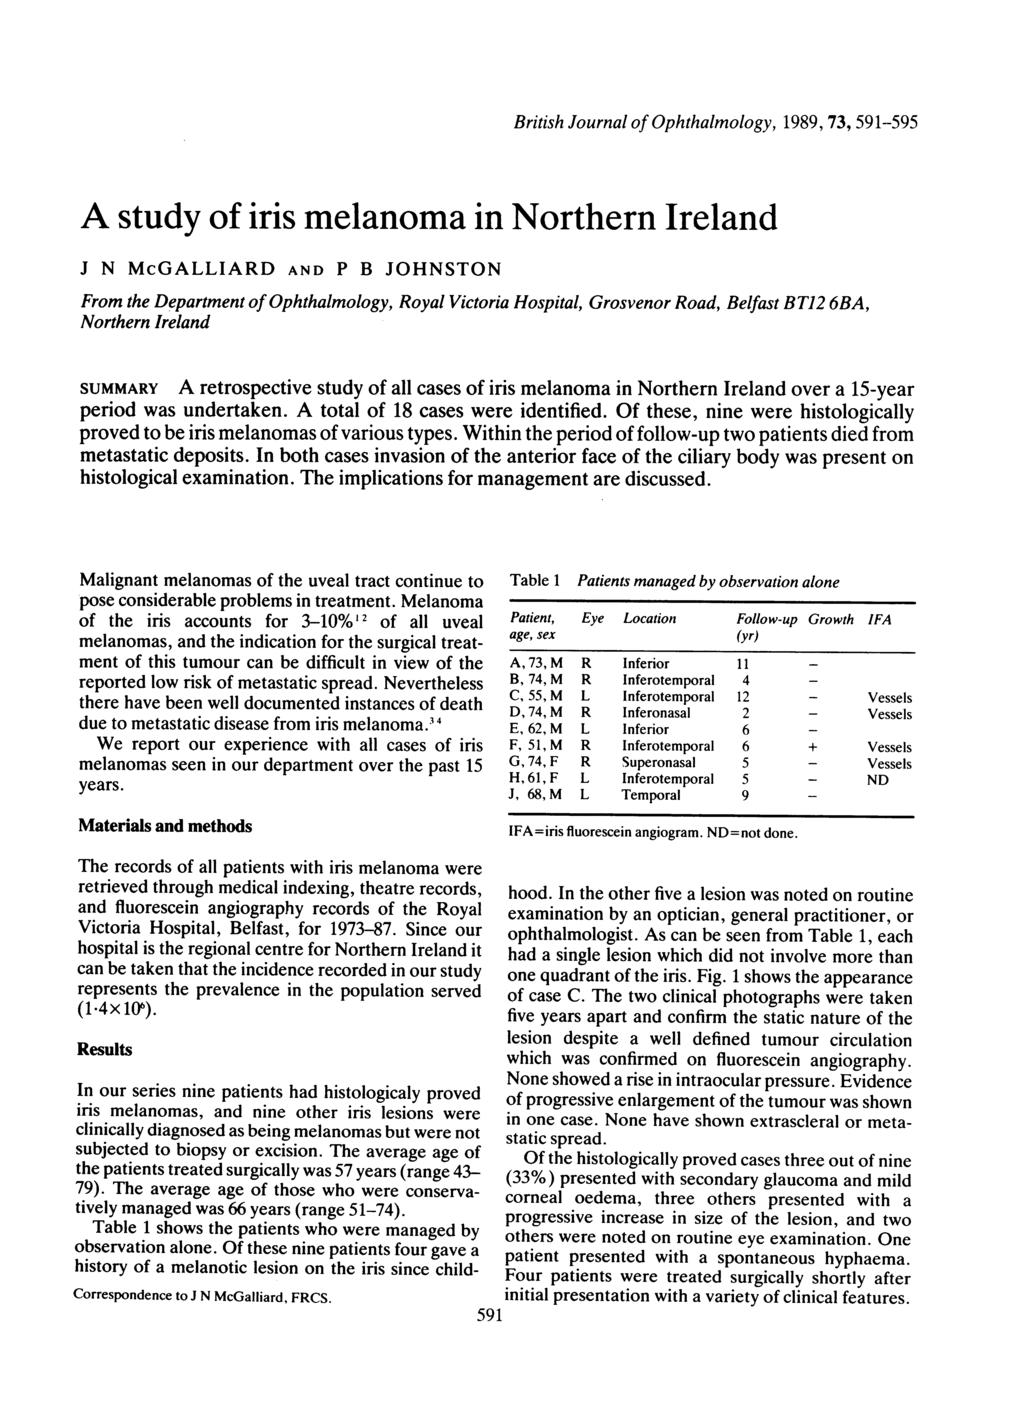 British Journal of Ophthalmology, 1989, 73, 591-595 A study of iris melanoma in Northern Ireland J N McGALLIARD AND P B JOHNSTON From the Department of Ophthalmology, Royal Victoria Hospital,